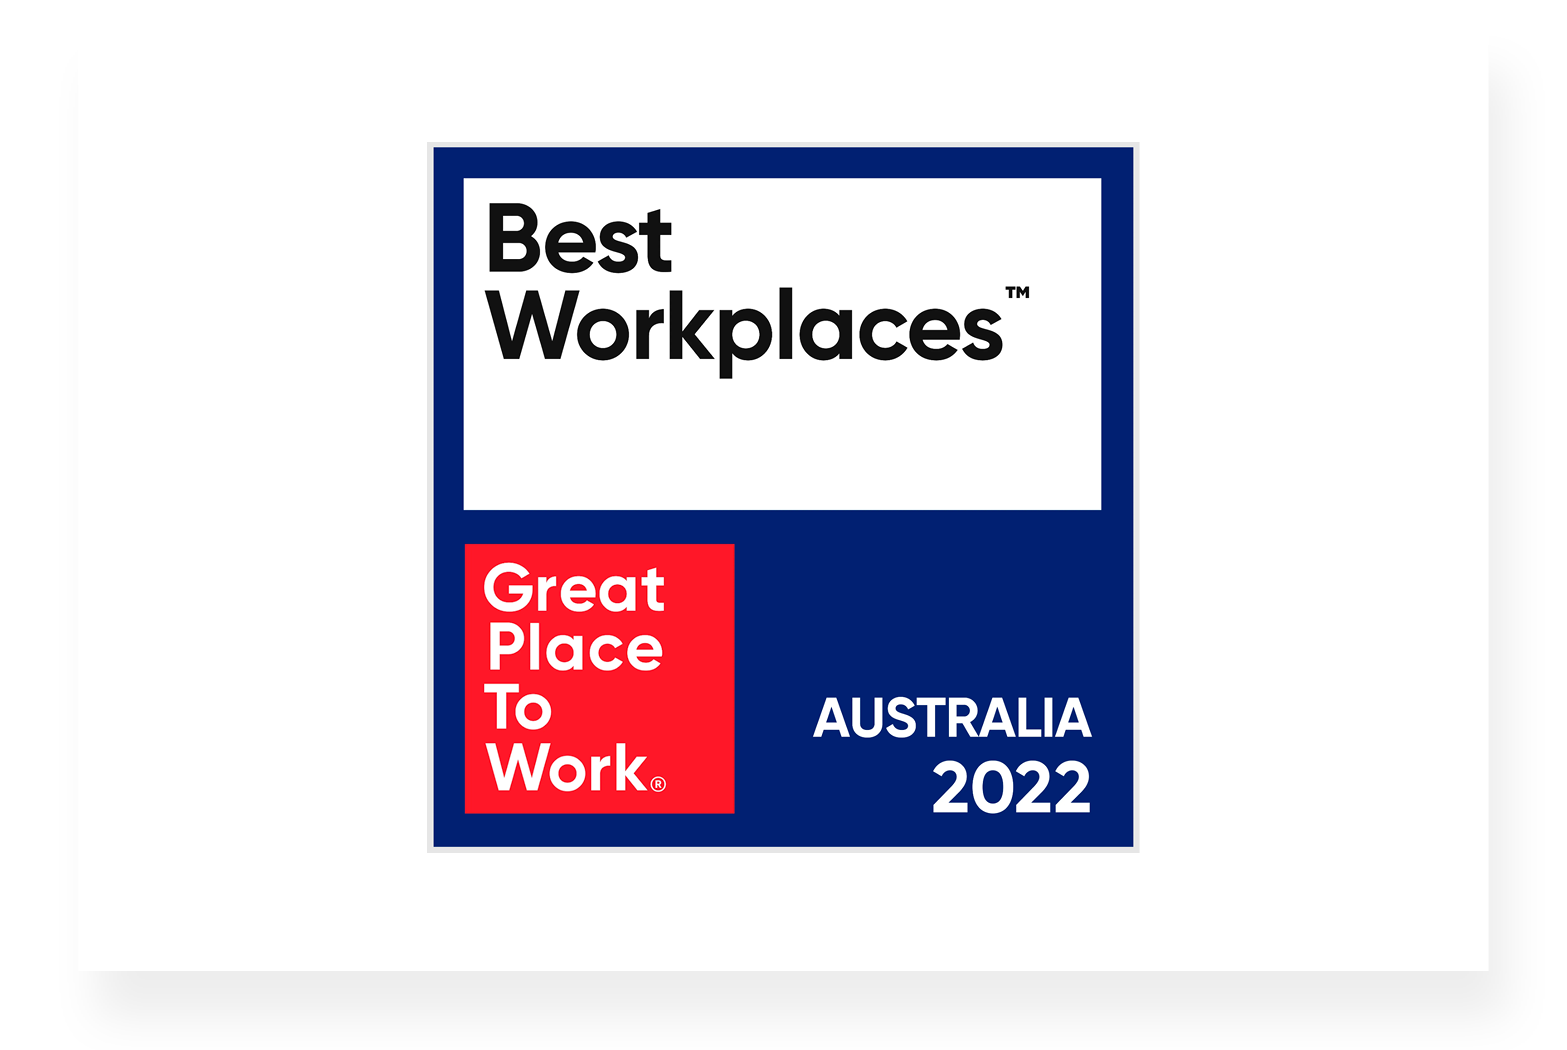 Great Place to Work award for Best Workplaces, Australia 2022